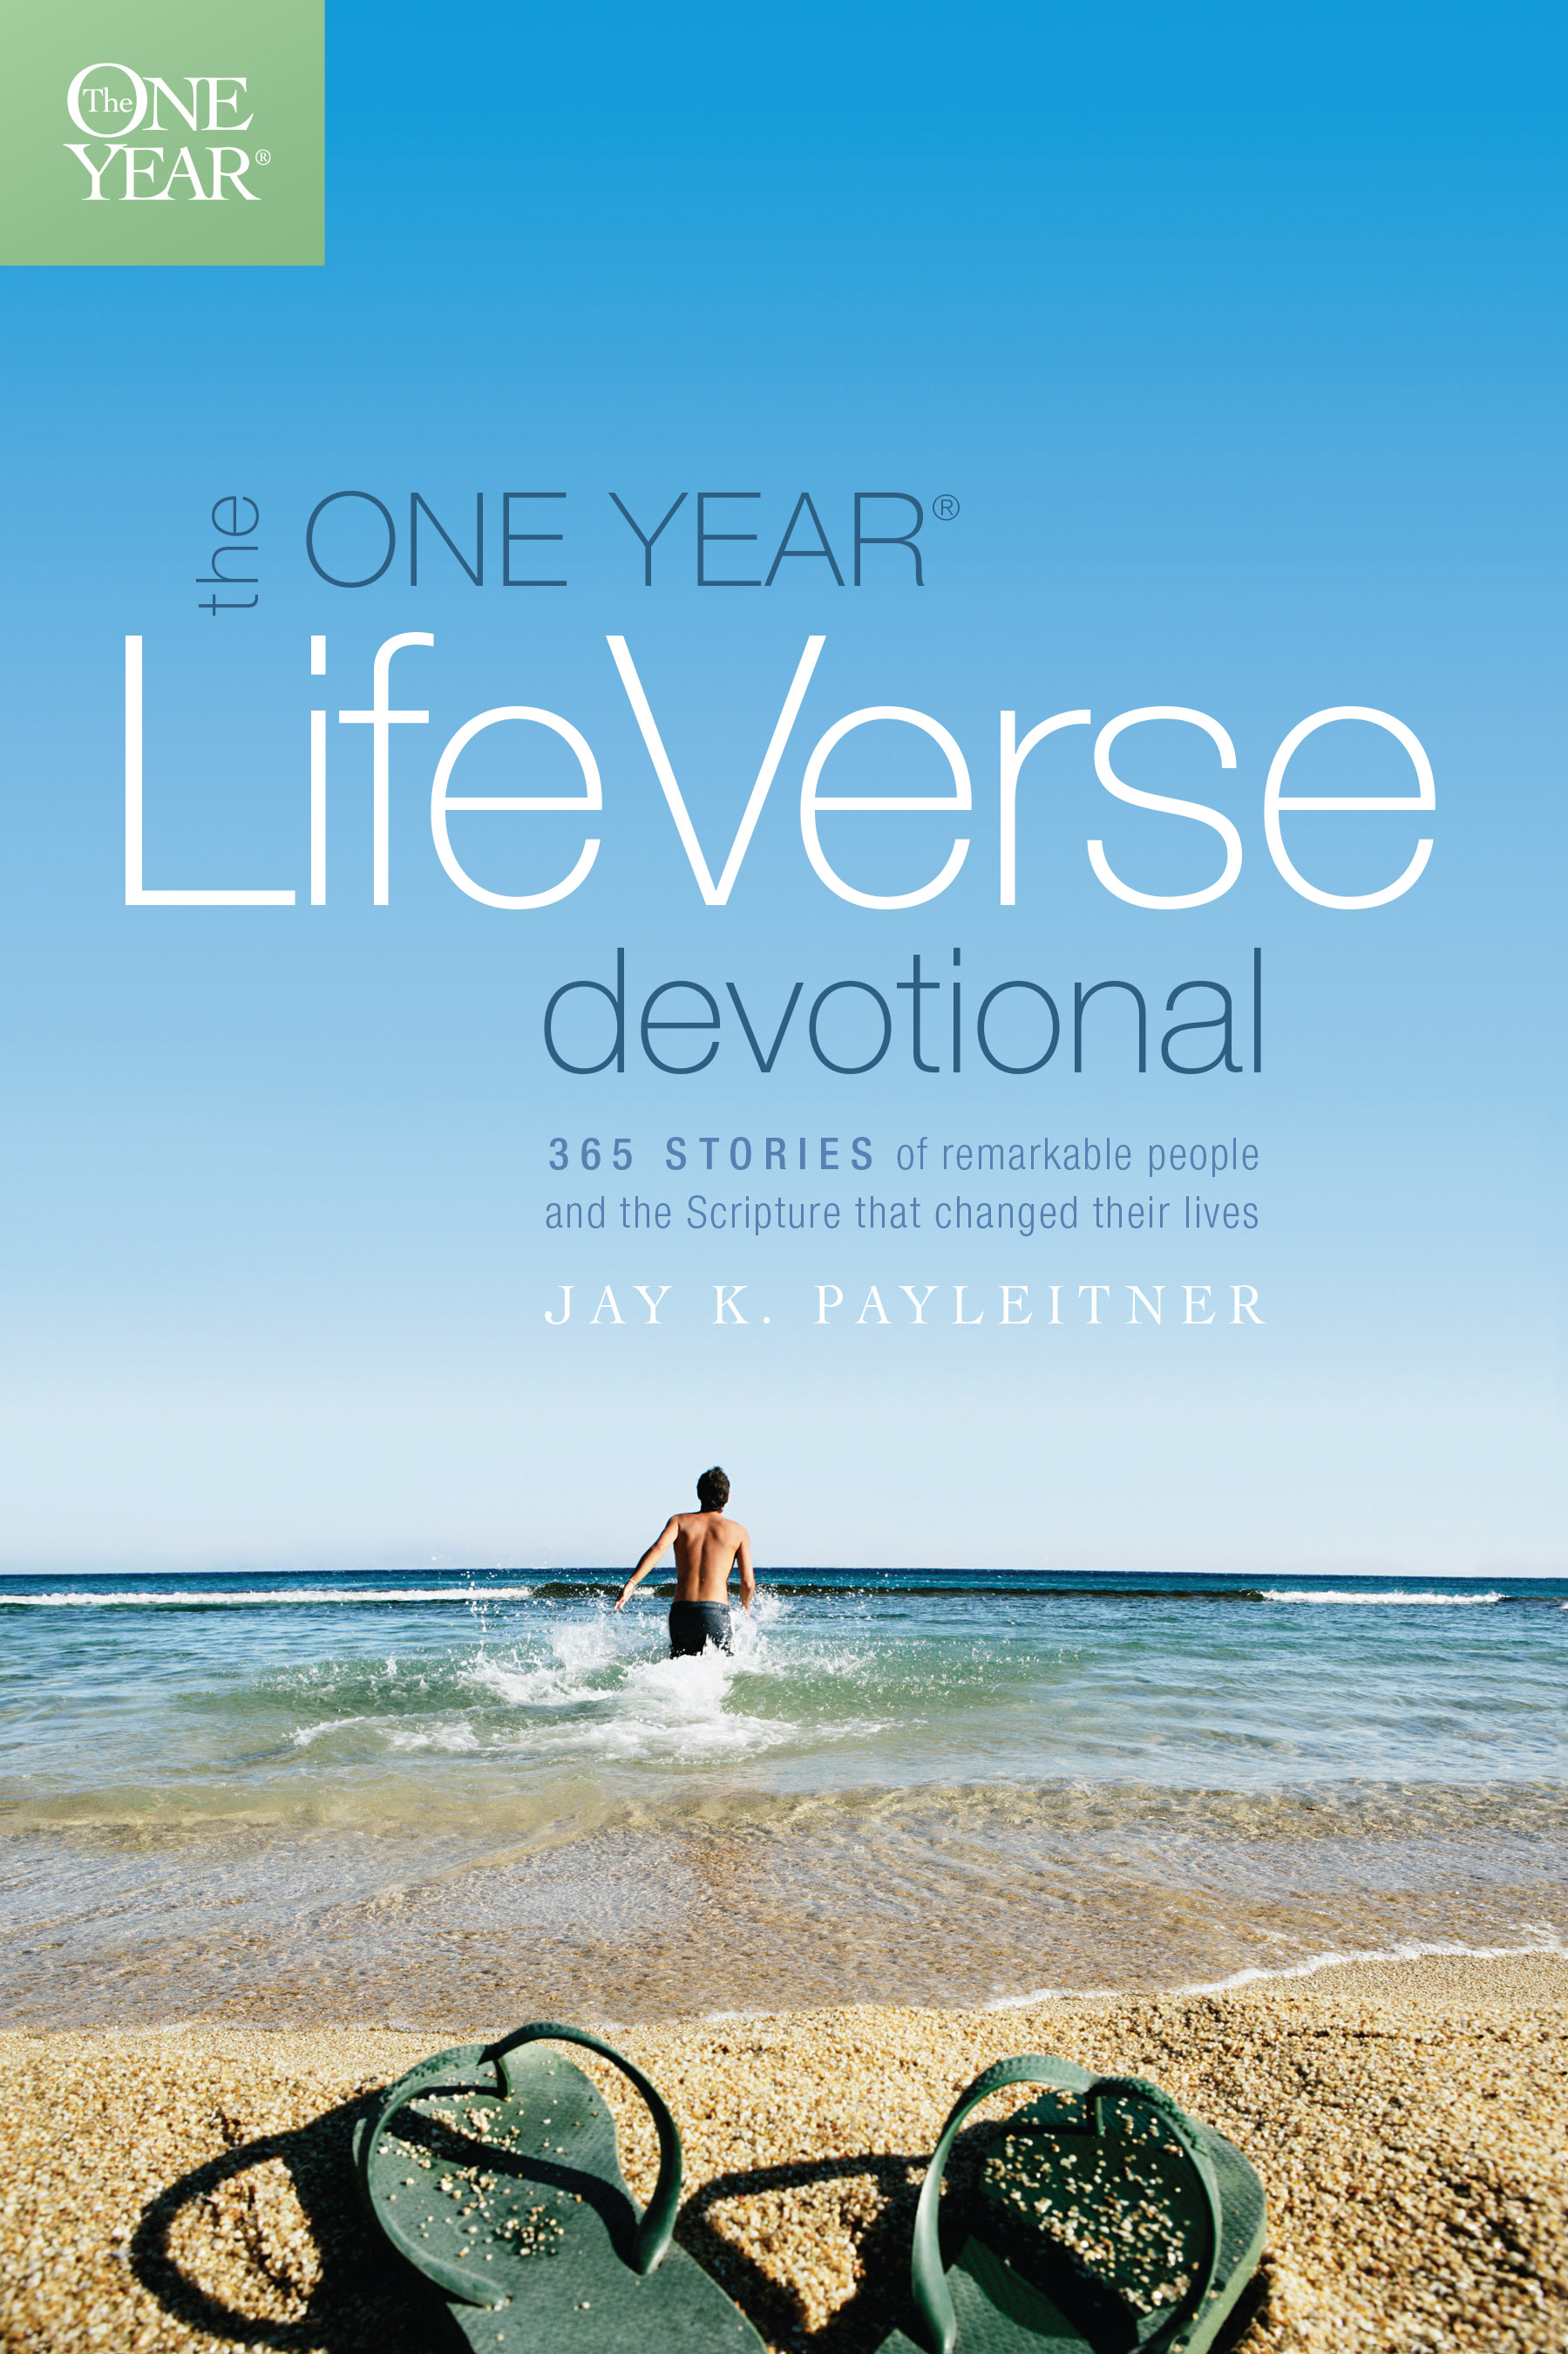 The One Year Life Verse Devotional